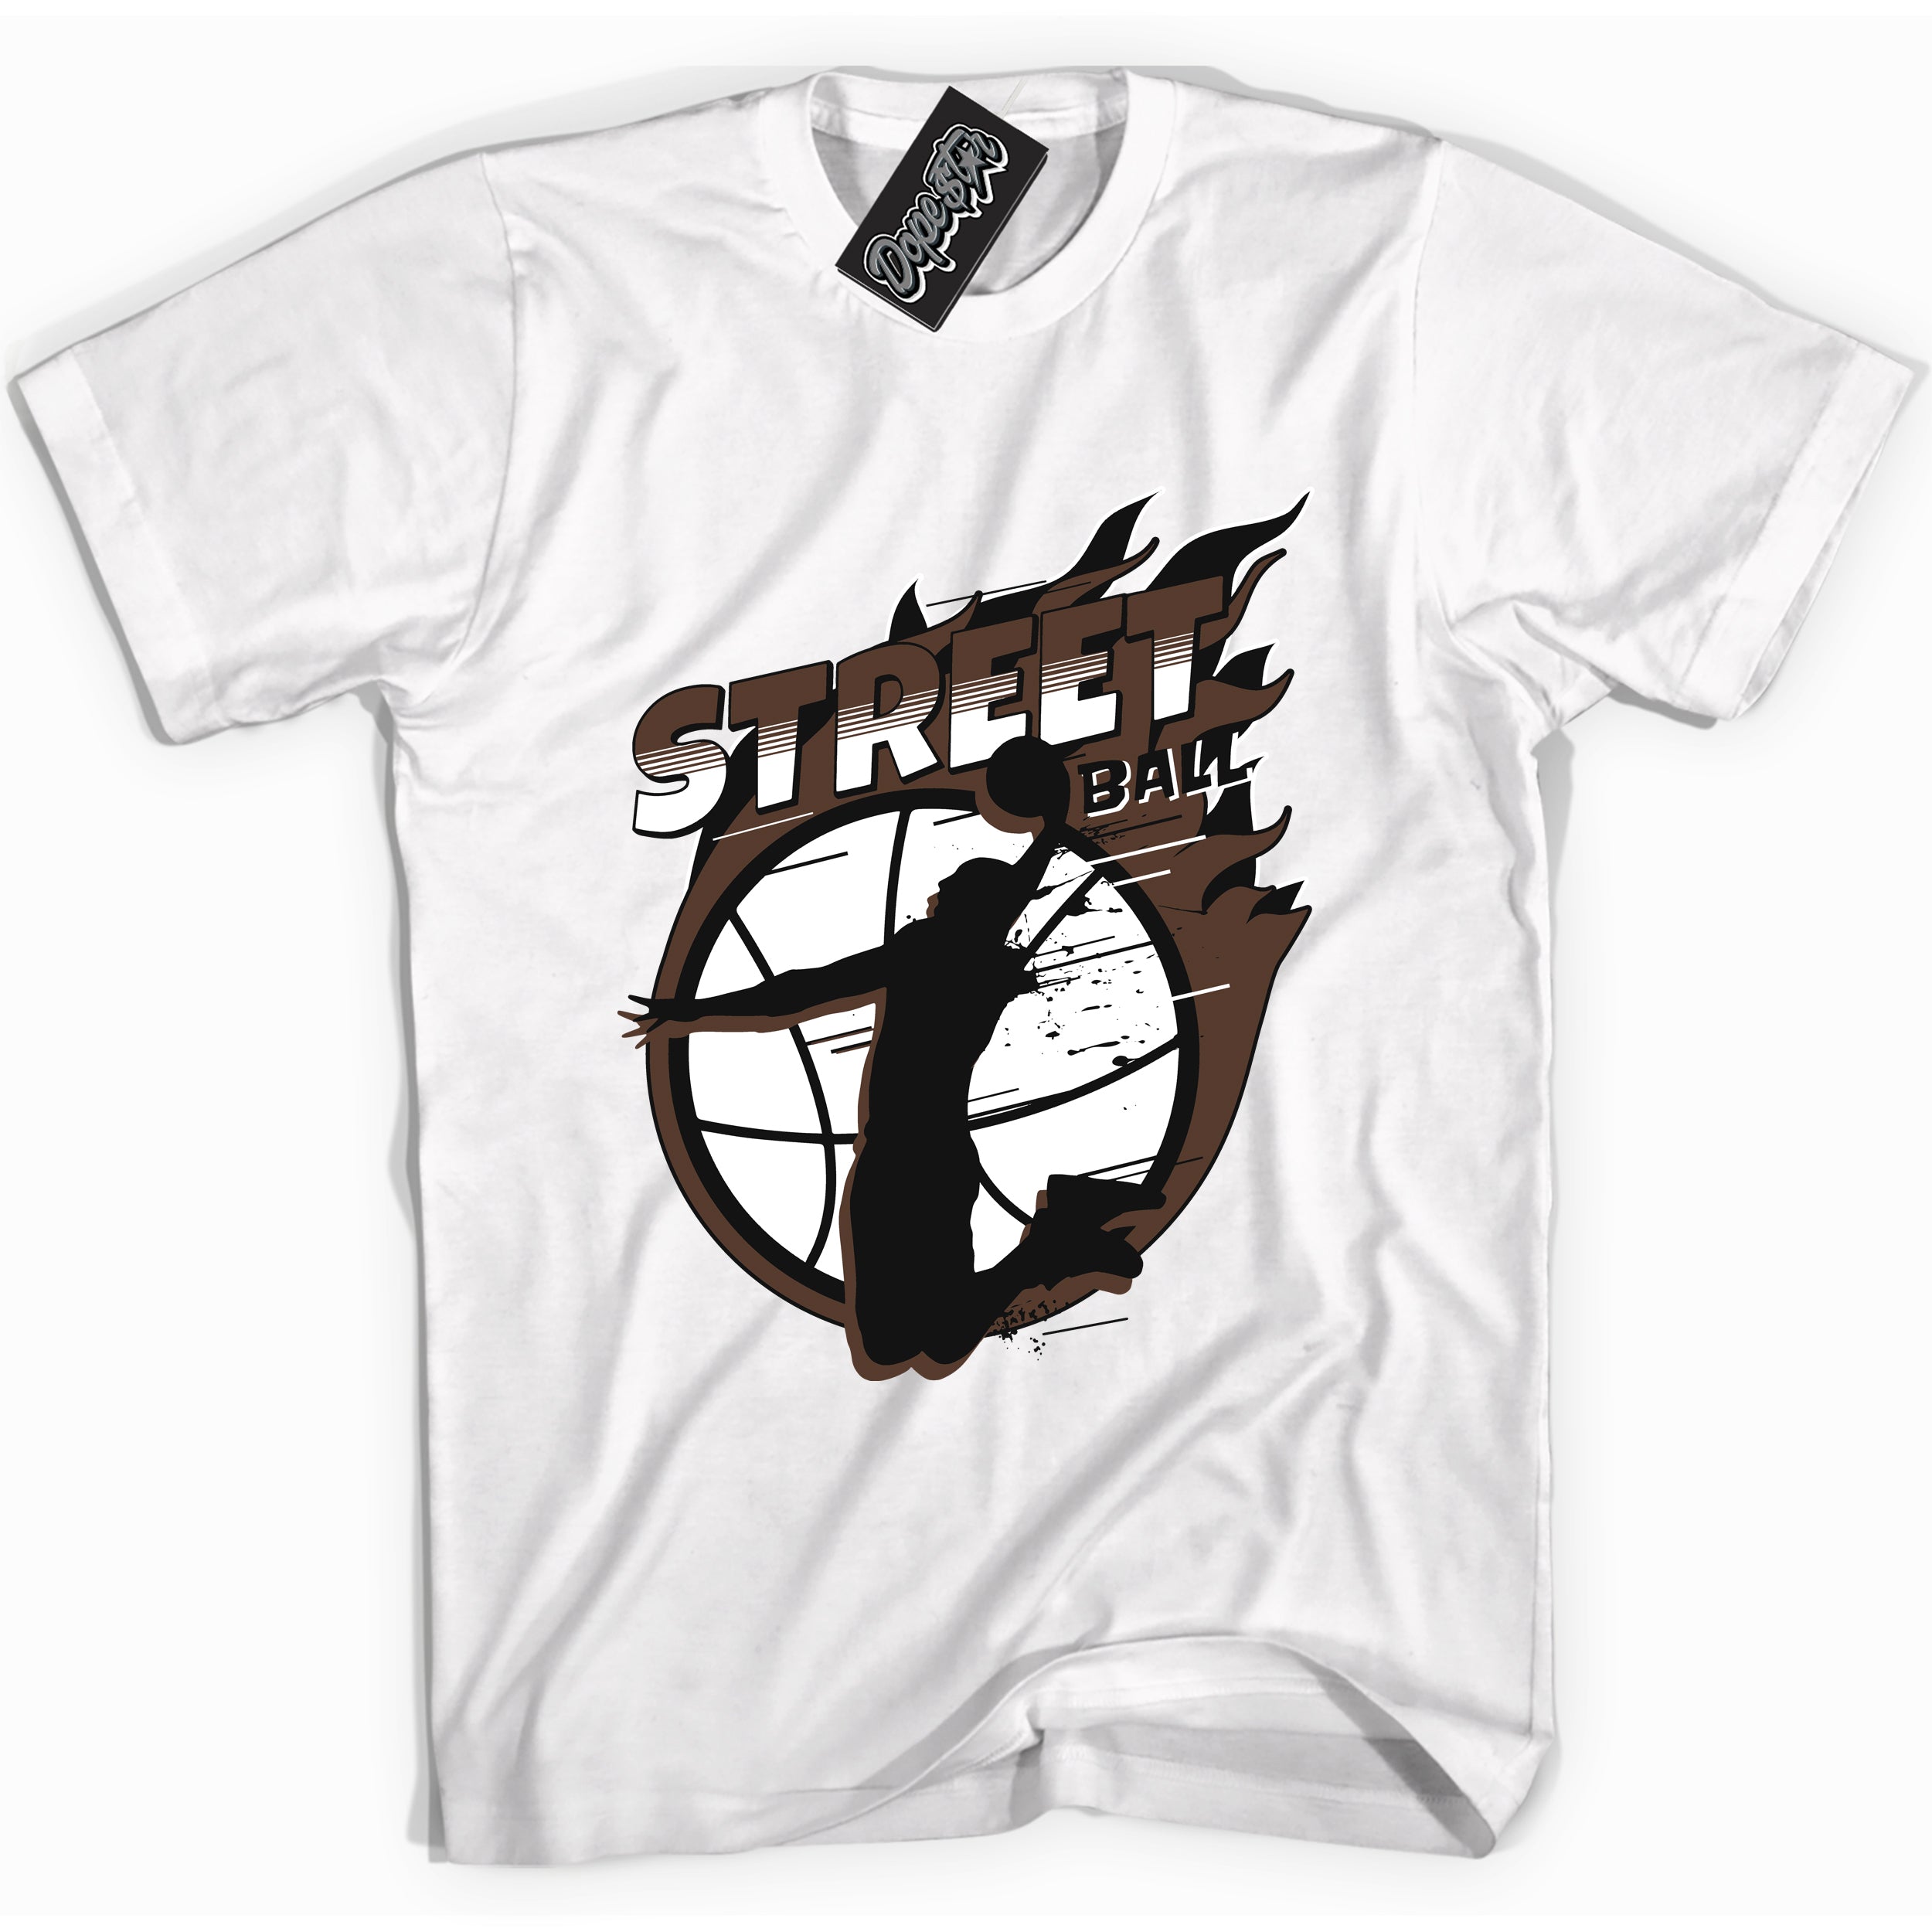 Cool White graphic tee with “ Street Ball ” design, that perfectly matches Palomino 1s sneakers 